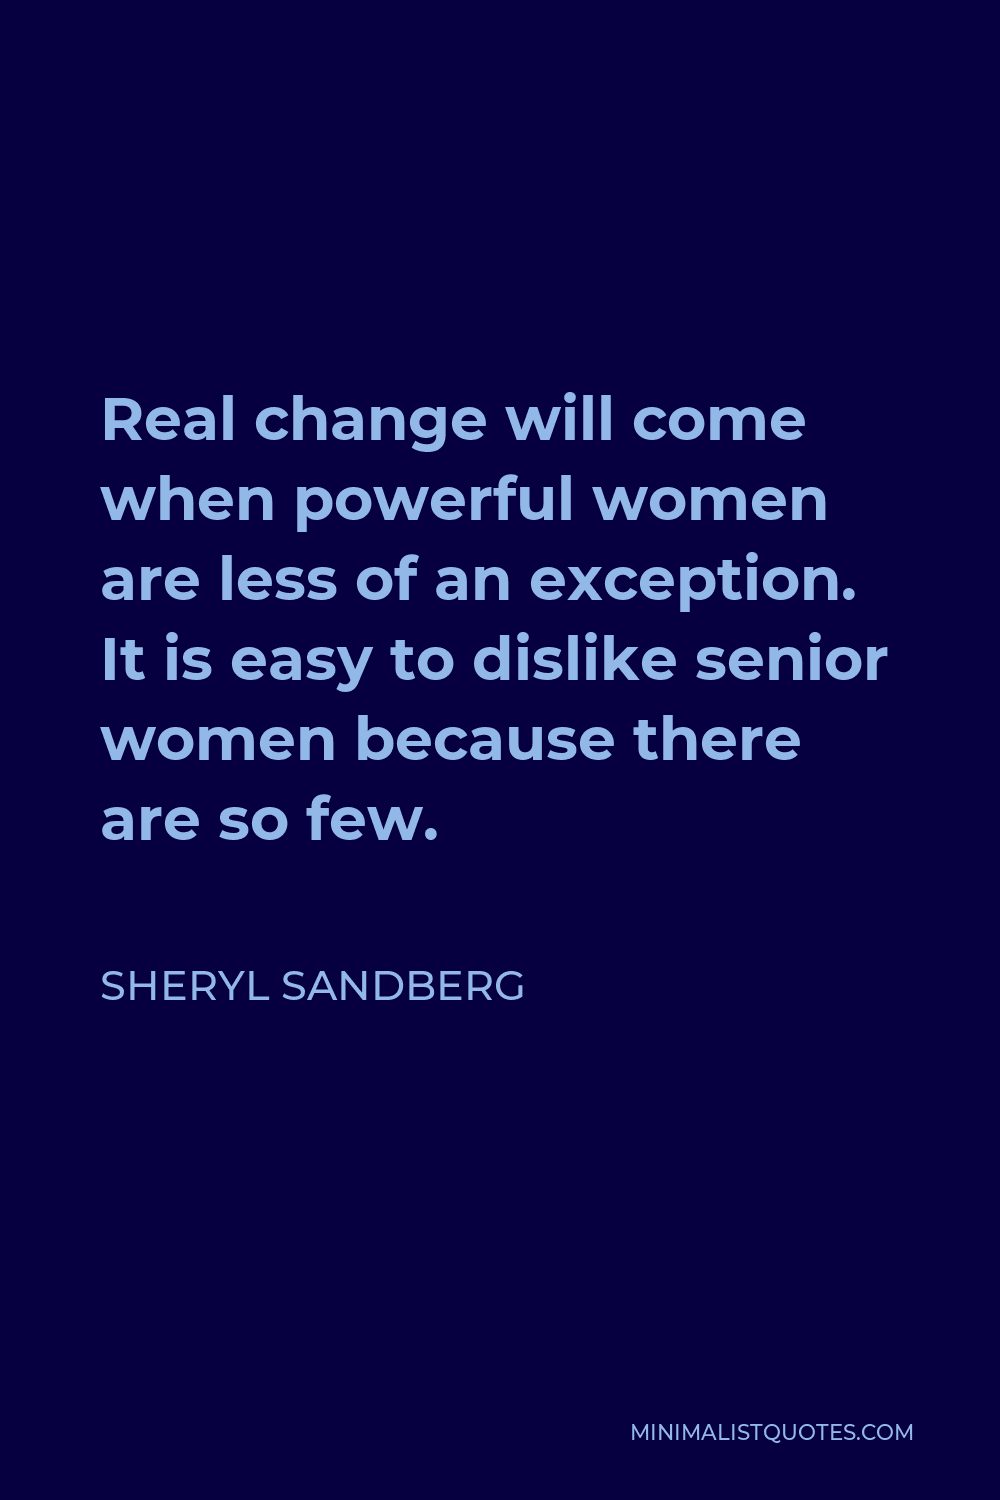 Sheryl Sandberg Quote - Real change will come when powerful women are less of an exception. It is easy to dislike senior women because there are so few.